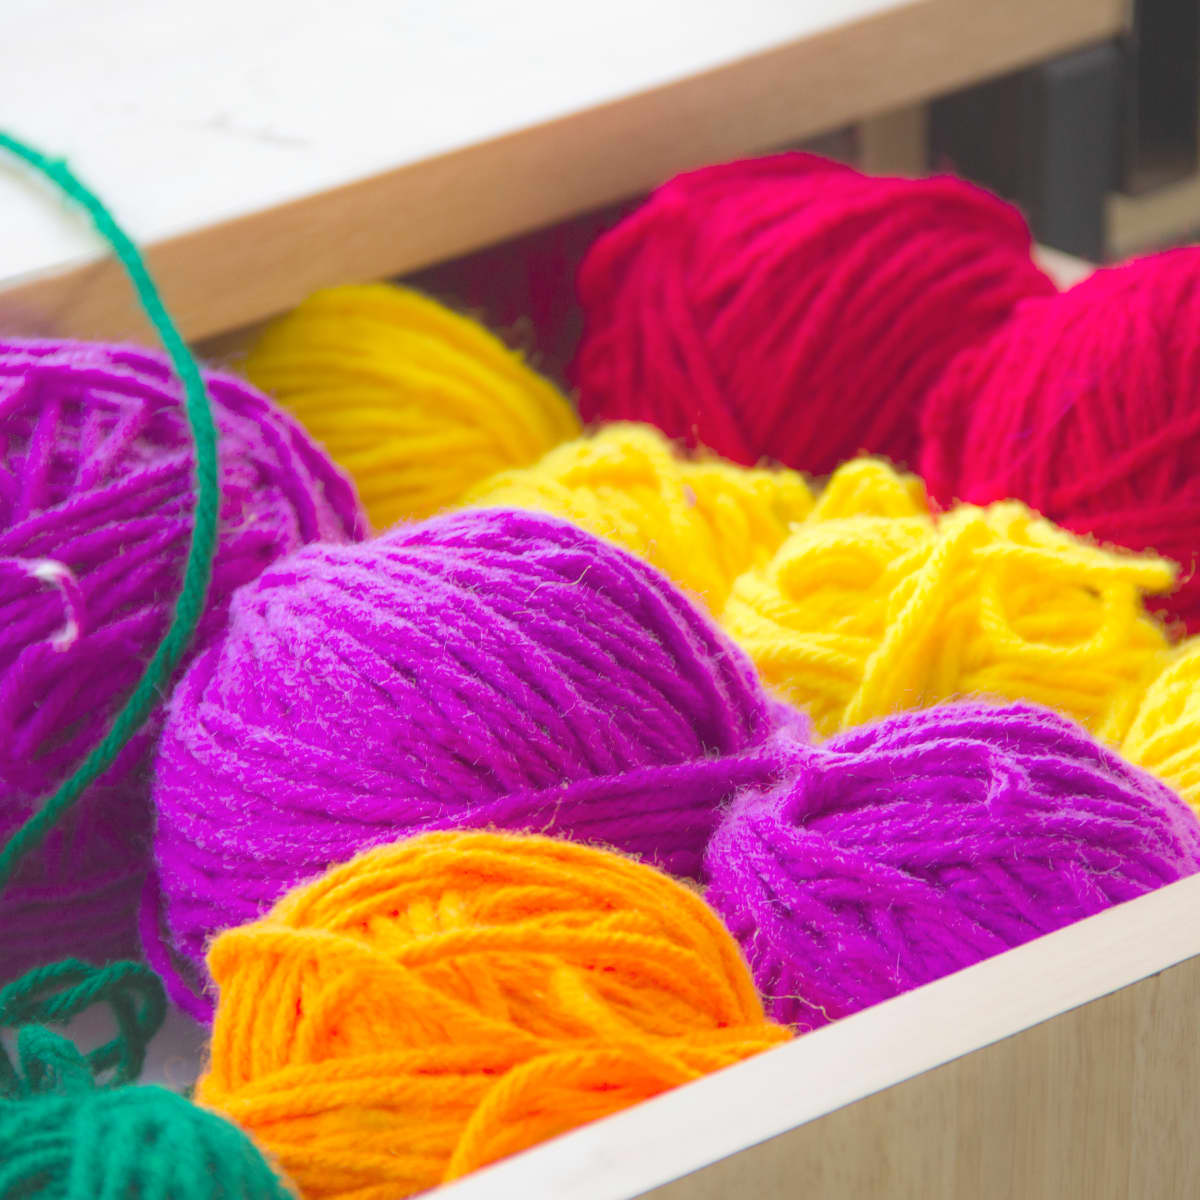 How to store yarn - ideas to organize your stash & mistakes to avoid